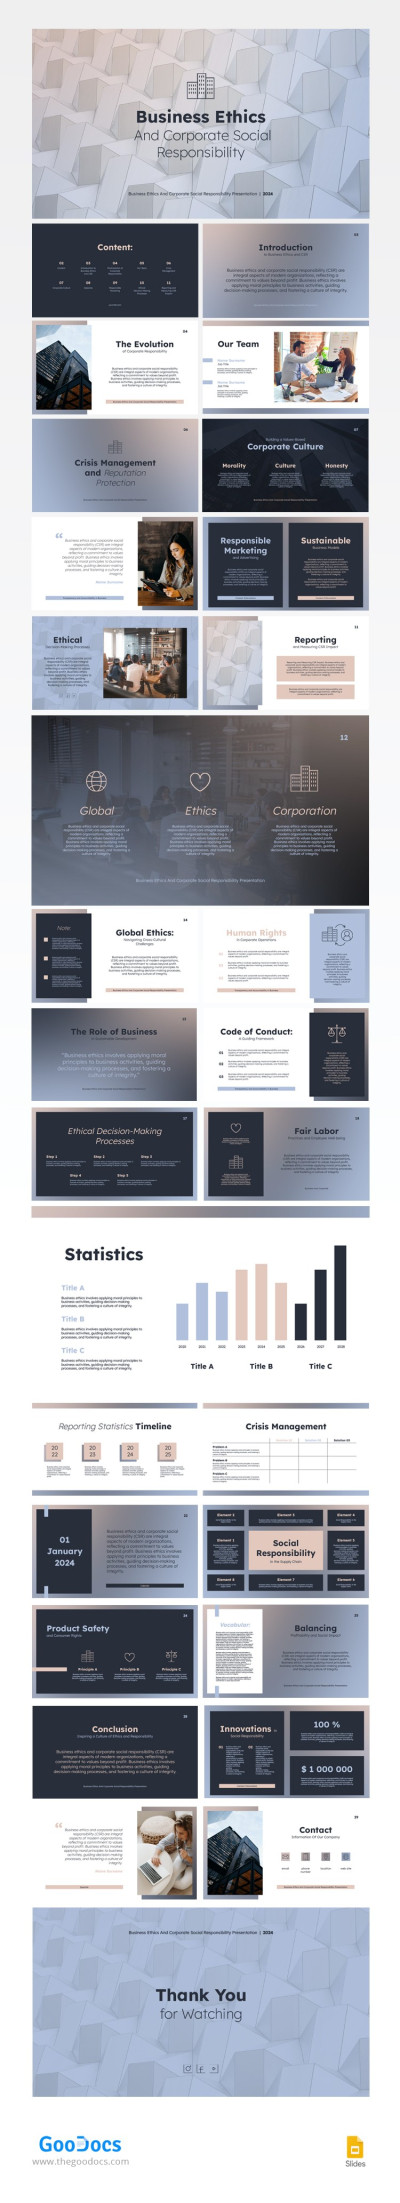 Business Ethics And Corporate Social Responsibility Template